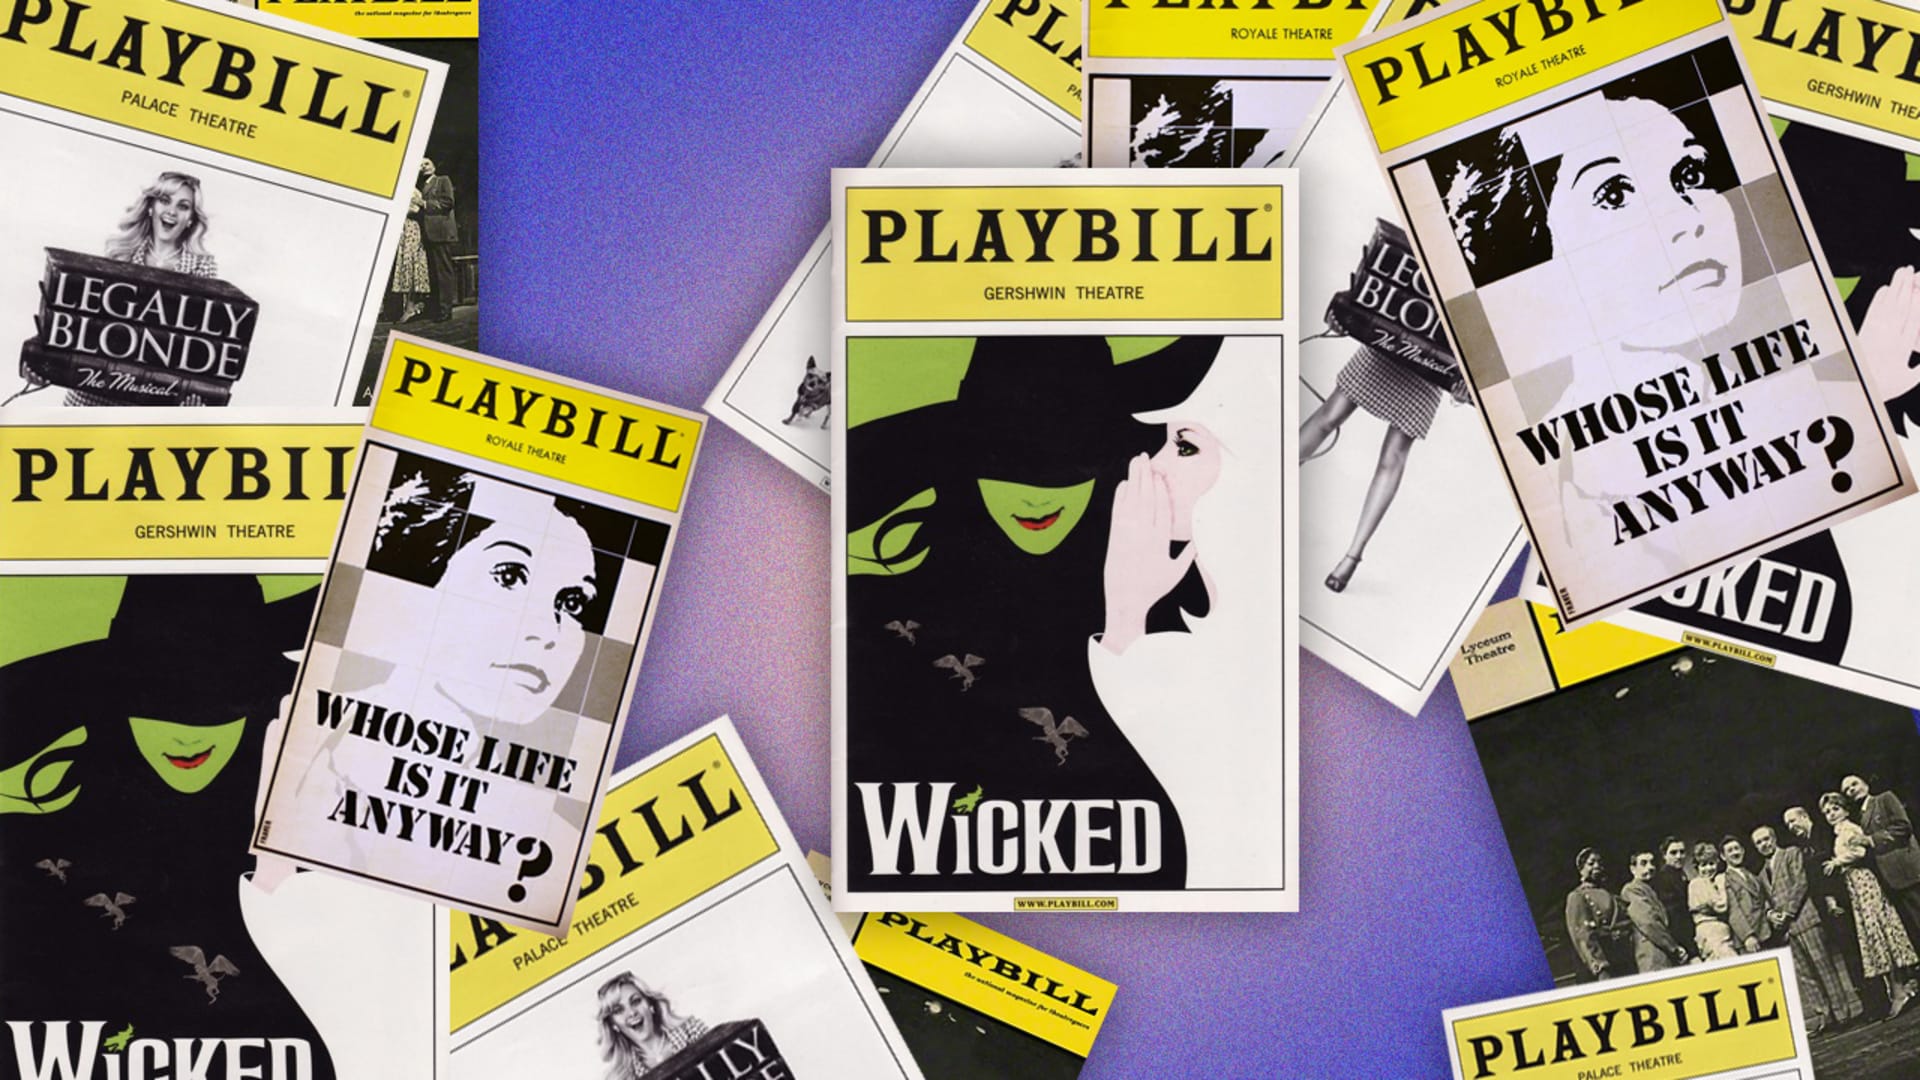 With Broadway shuttered for 2020, can Playbill survive the pandemic?